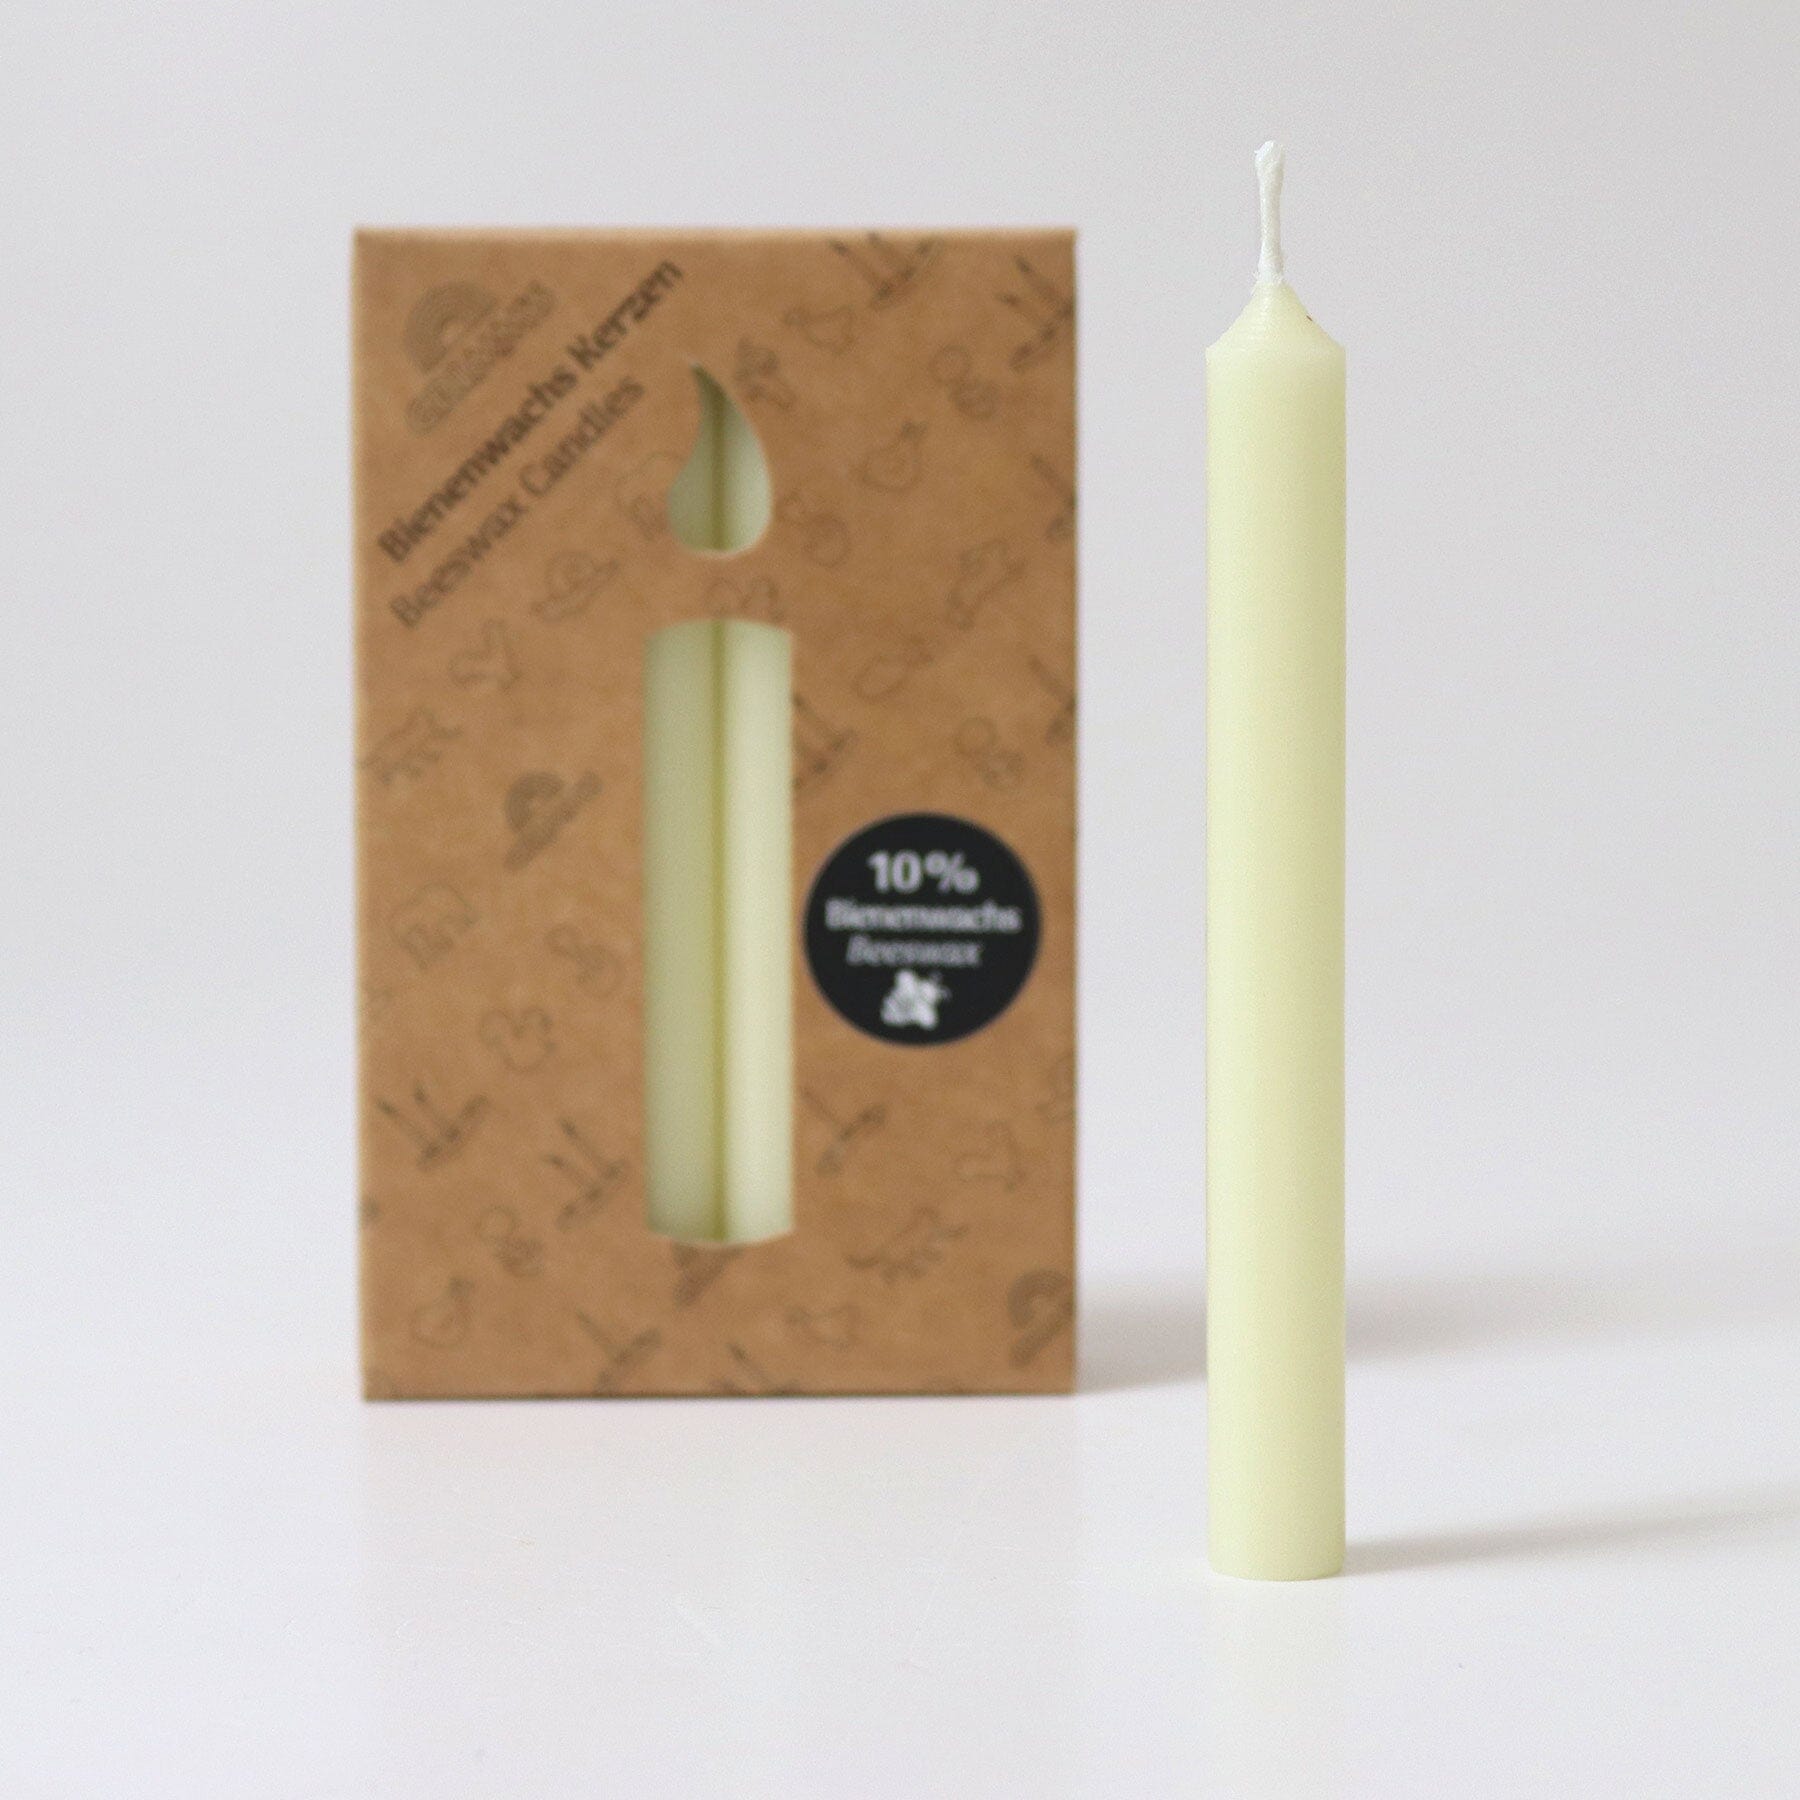 Grimm's Creme 10% Beeswax Candles, 12-Pack